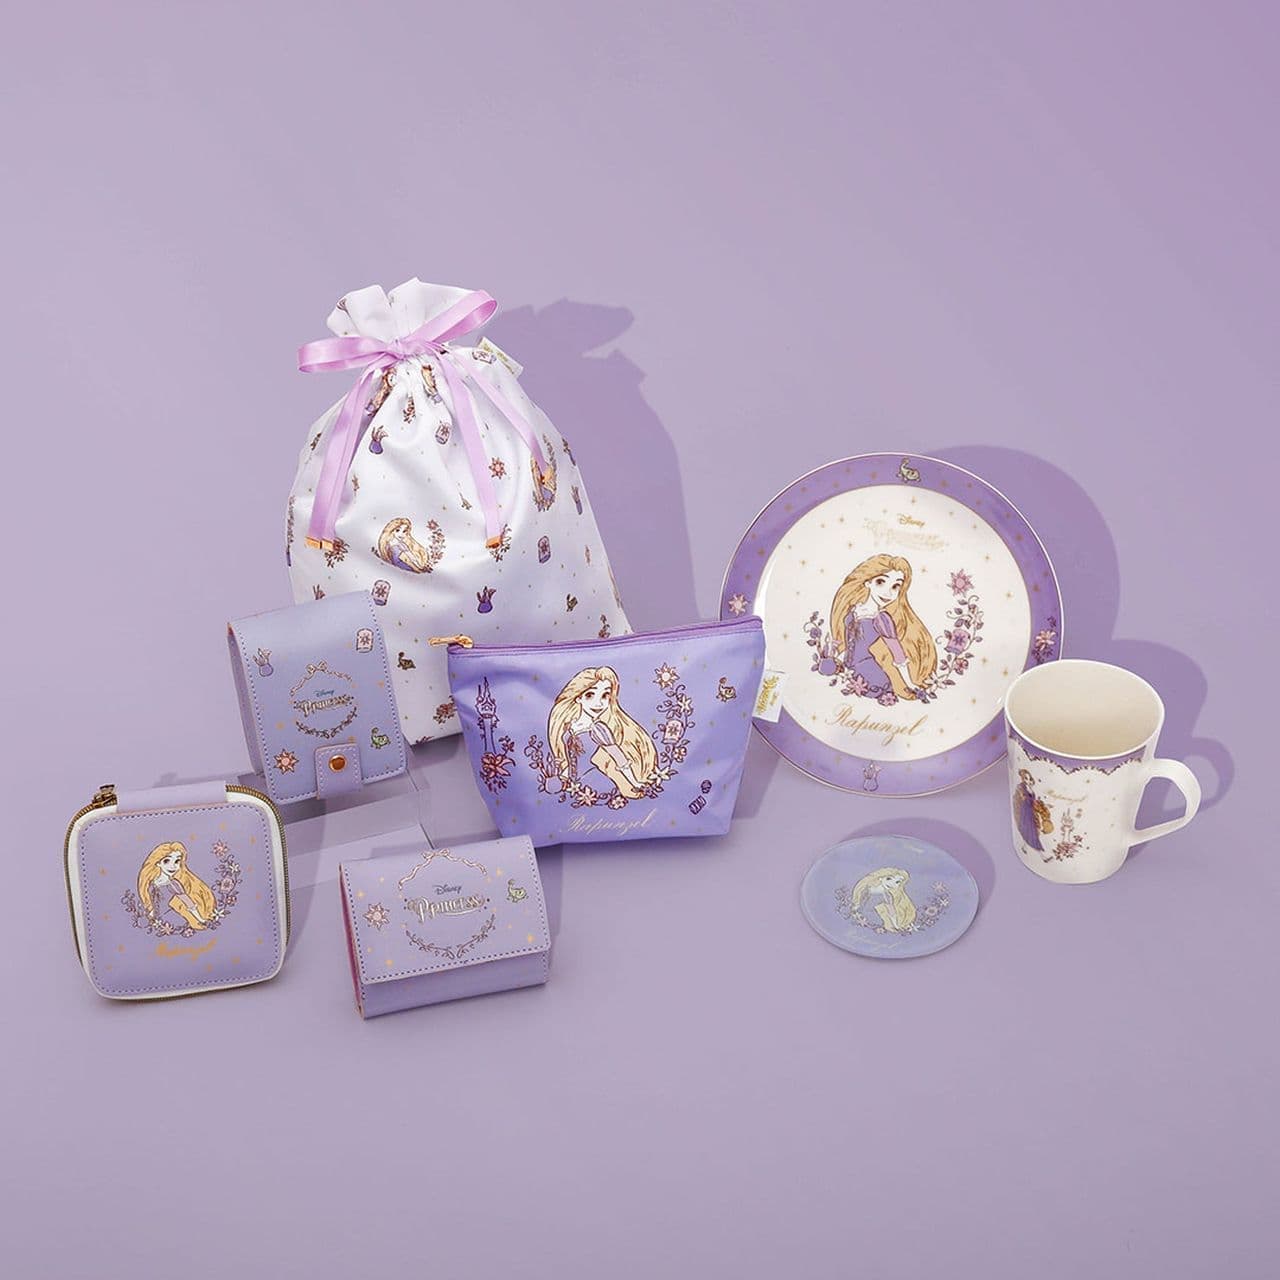 3COINS Disney Princess Limited Edition Items